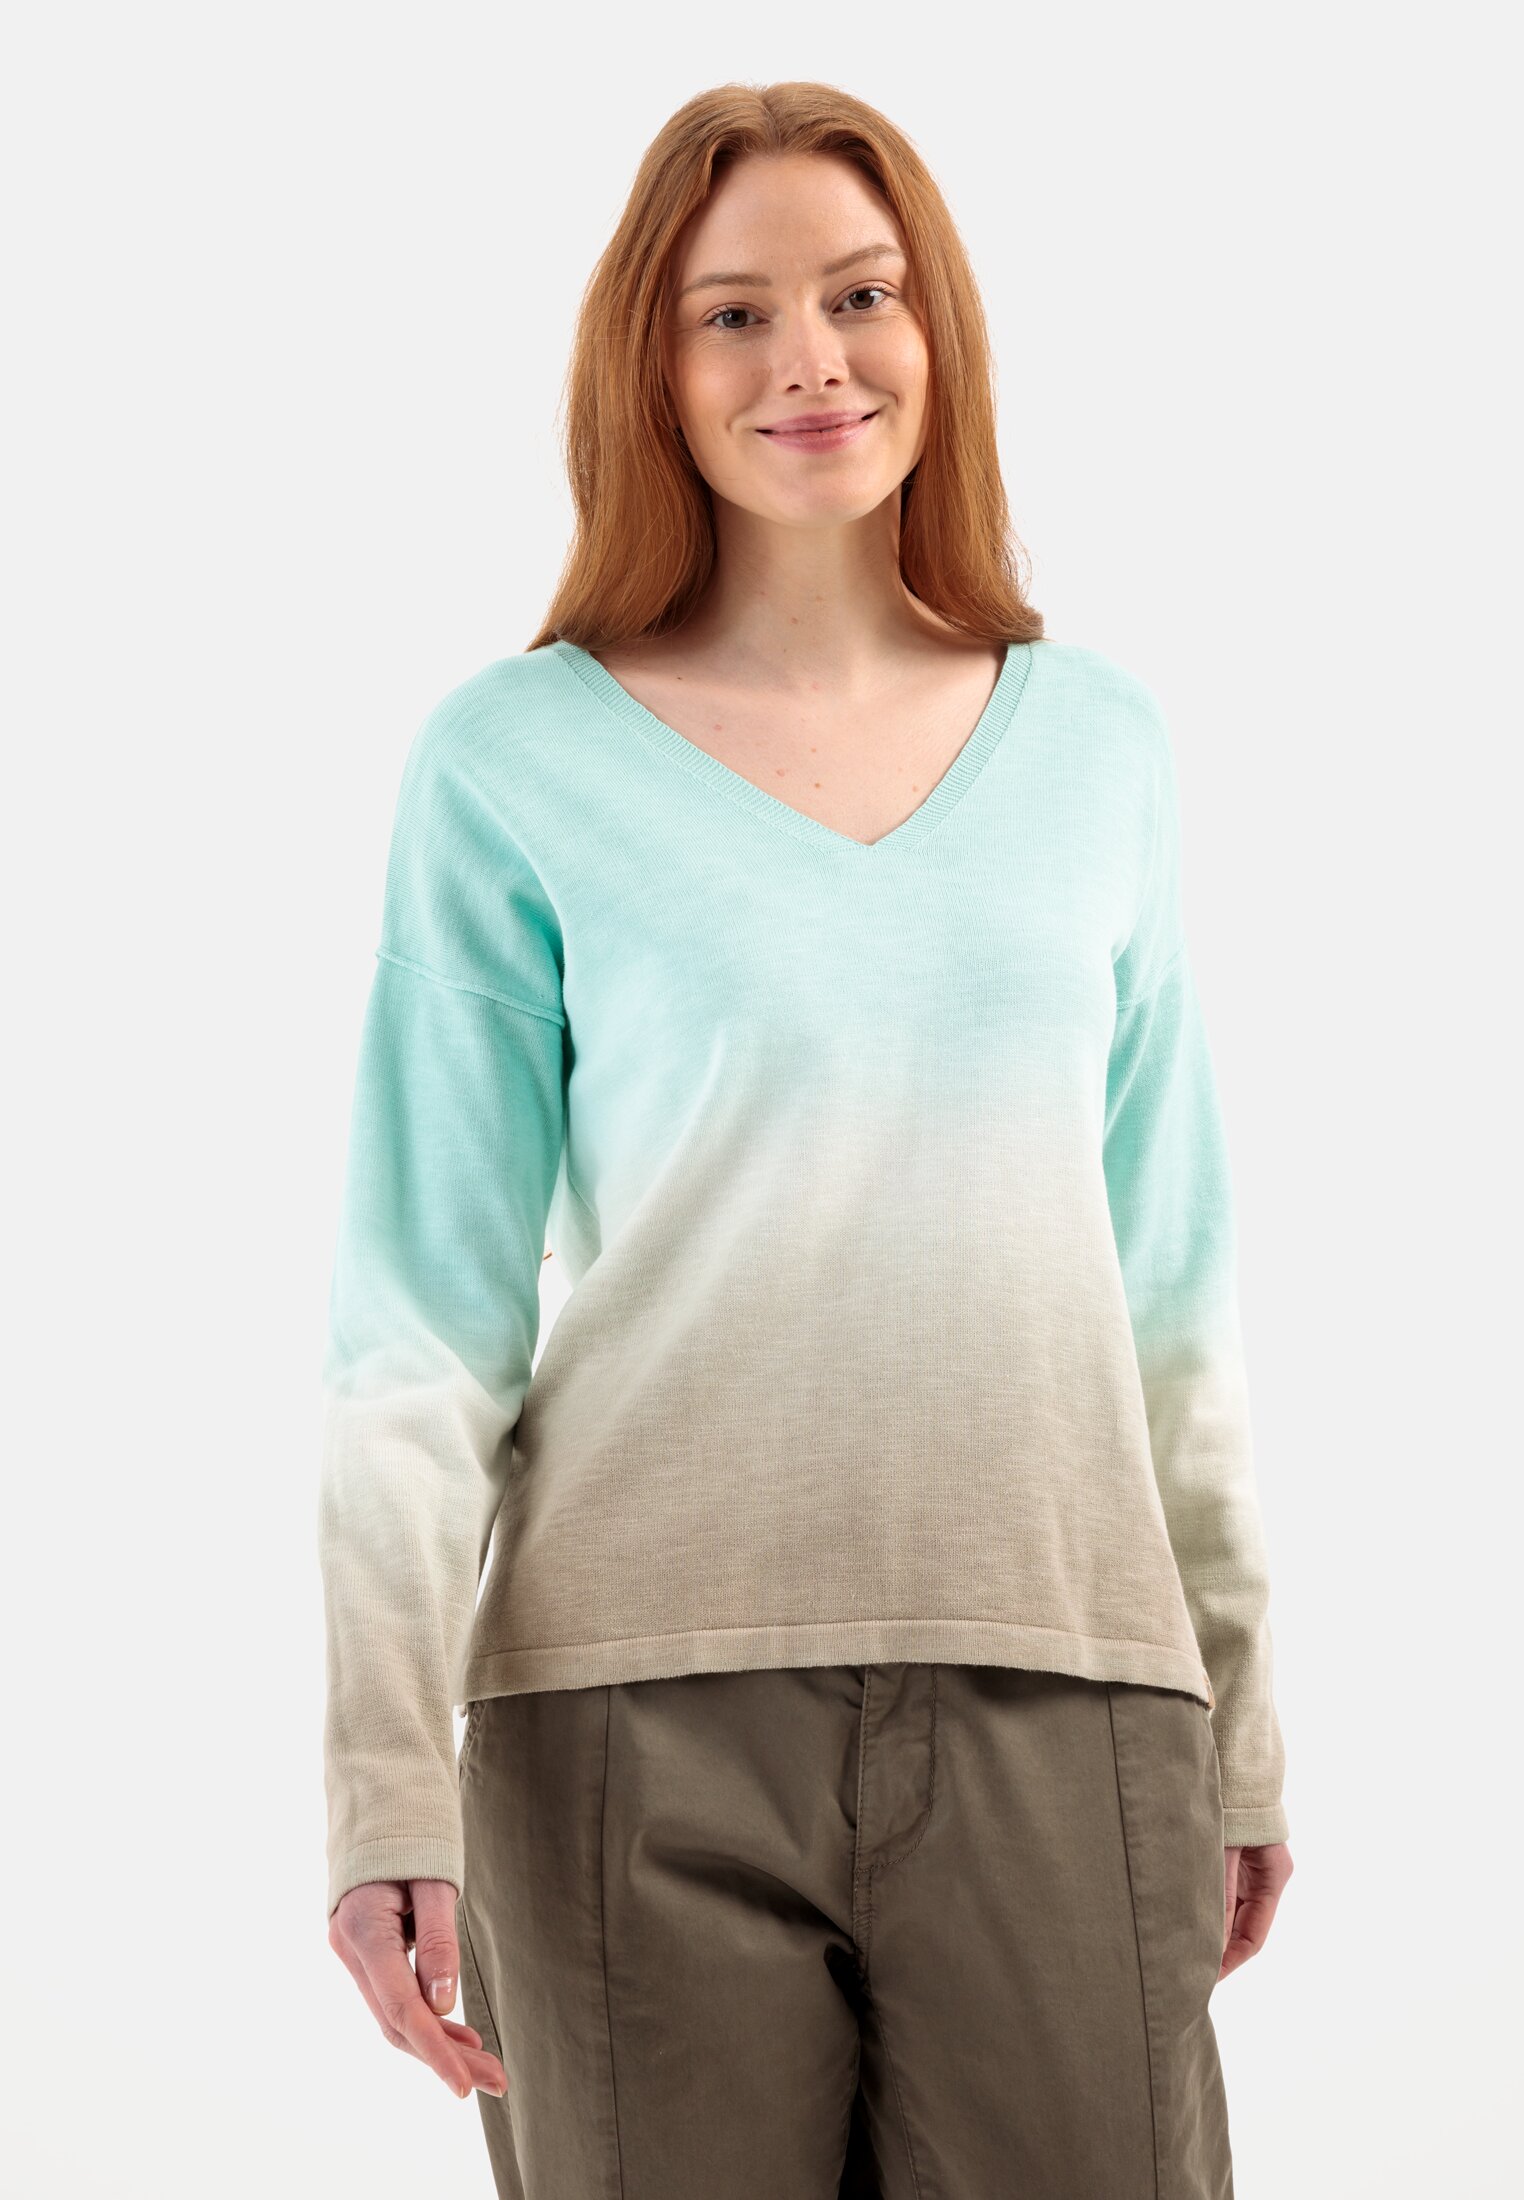 Camel Active Knit Sweater with dip dye effect